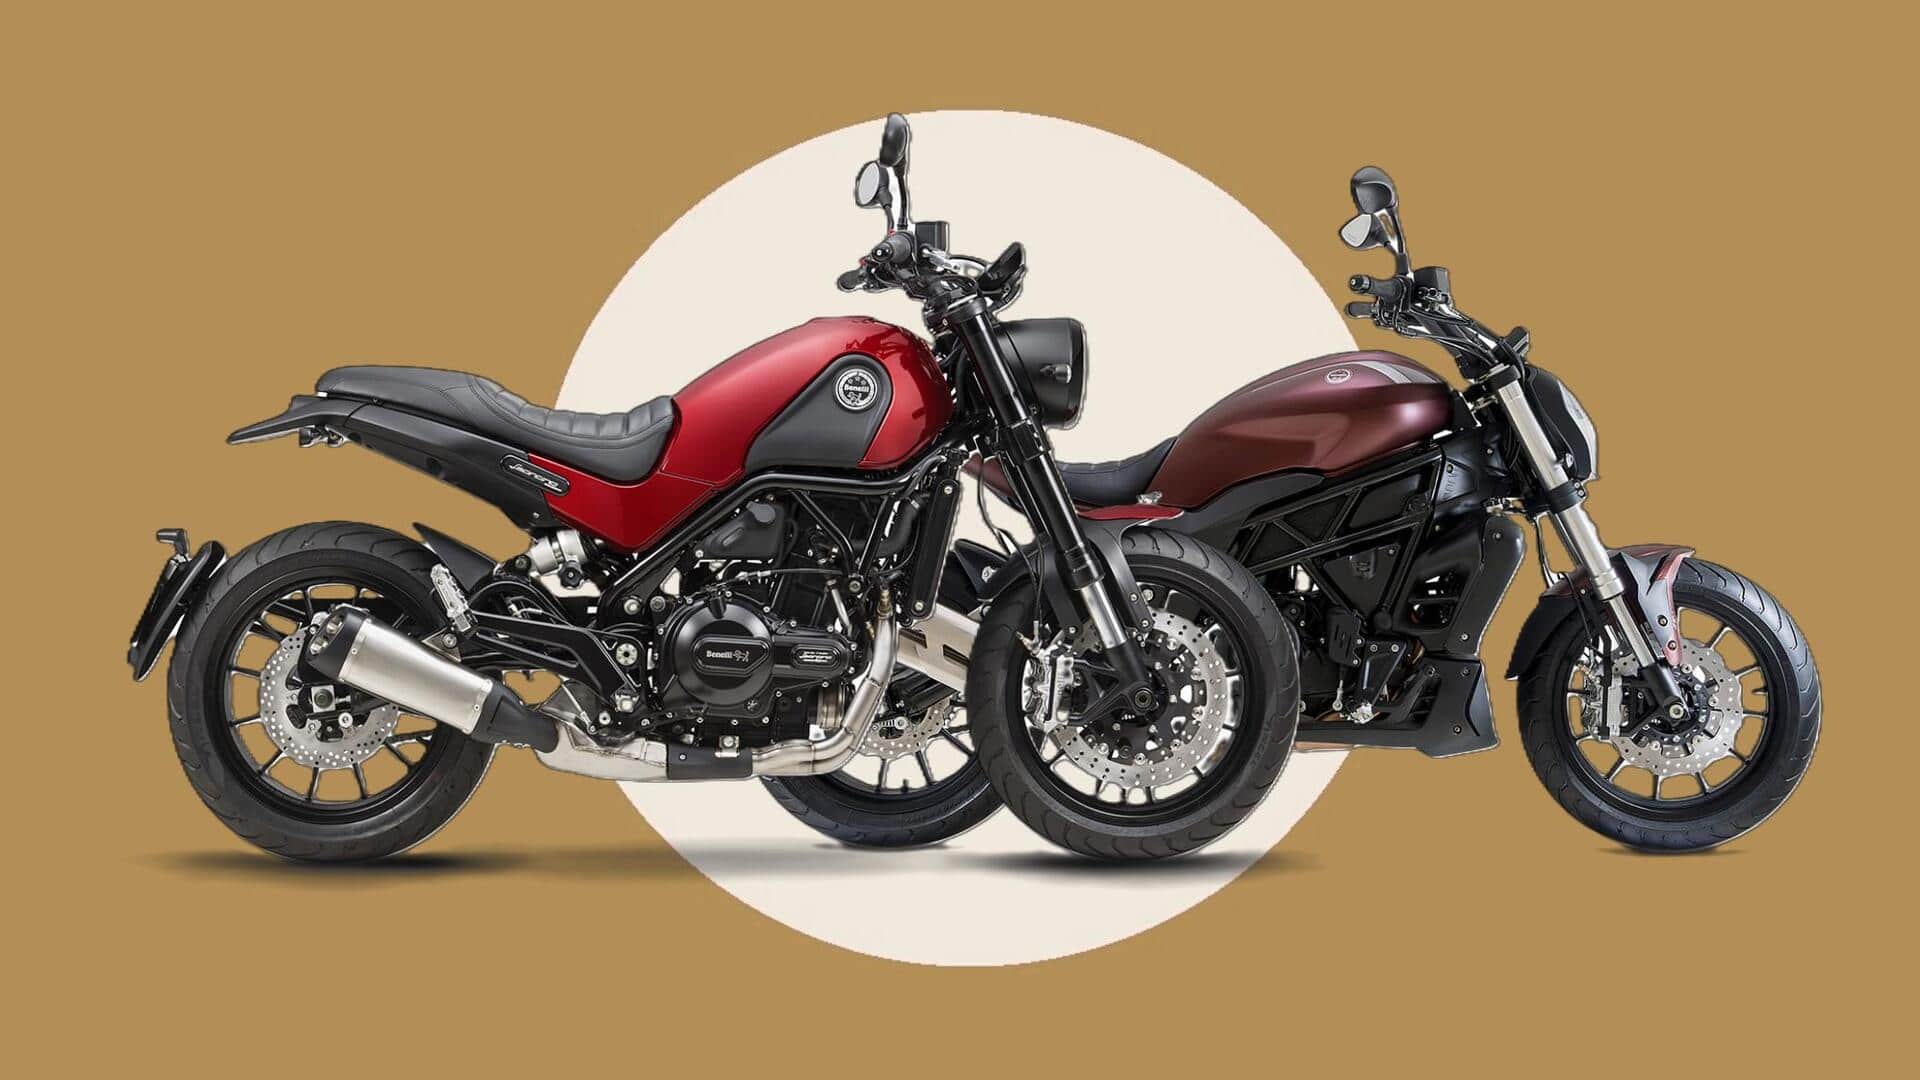 Benelli, Keeway bikes available with discounts worth Rs. 60,000